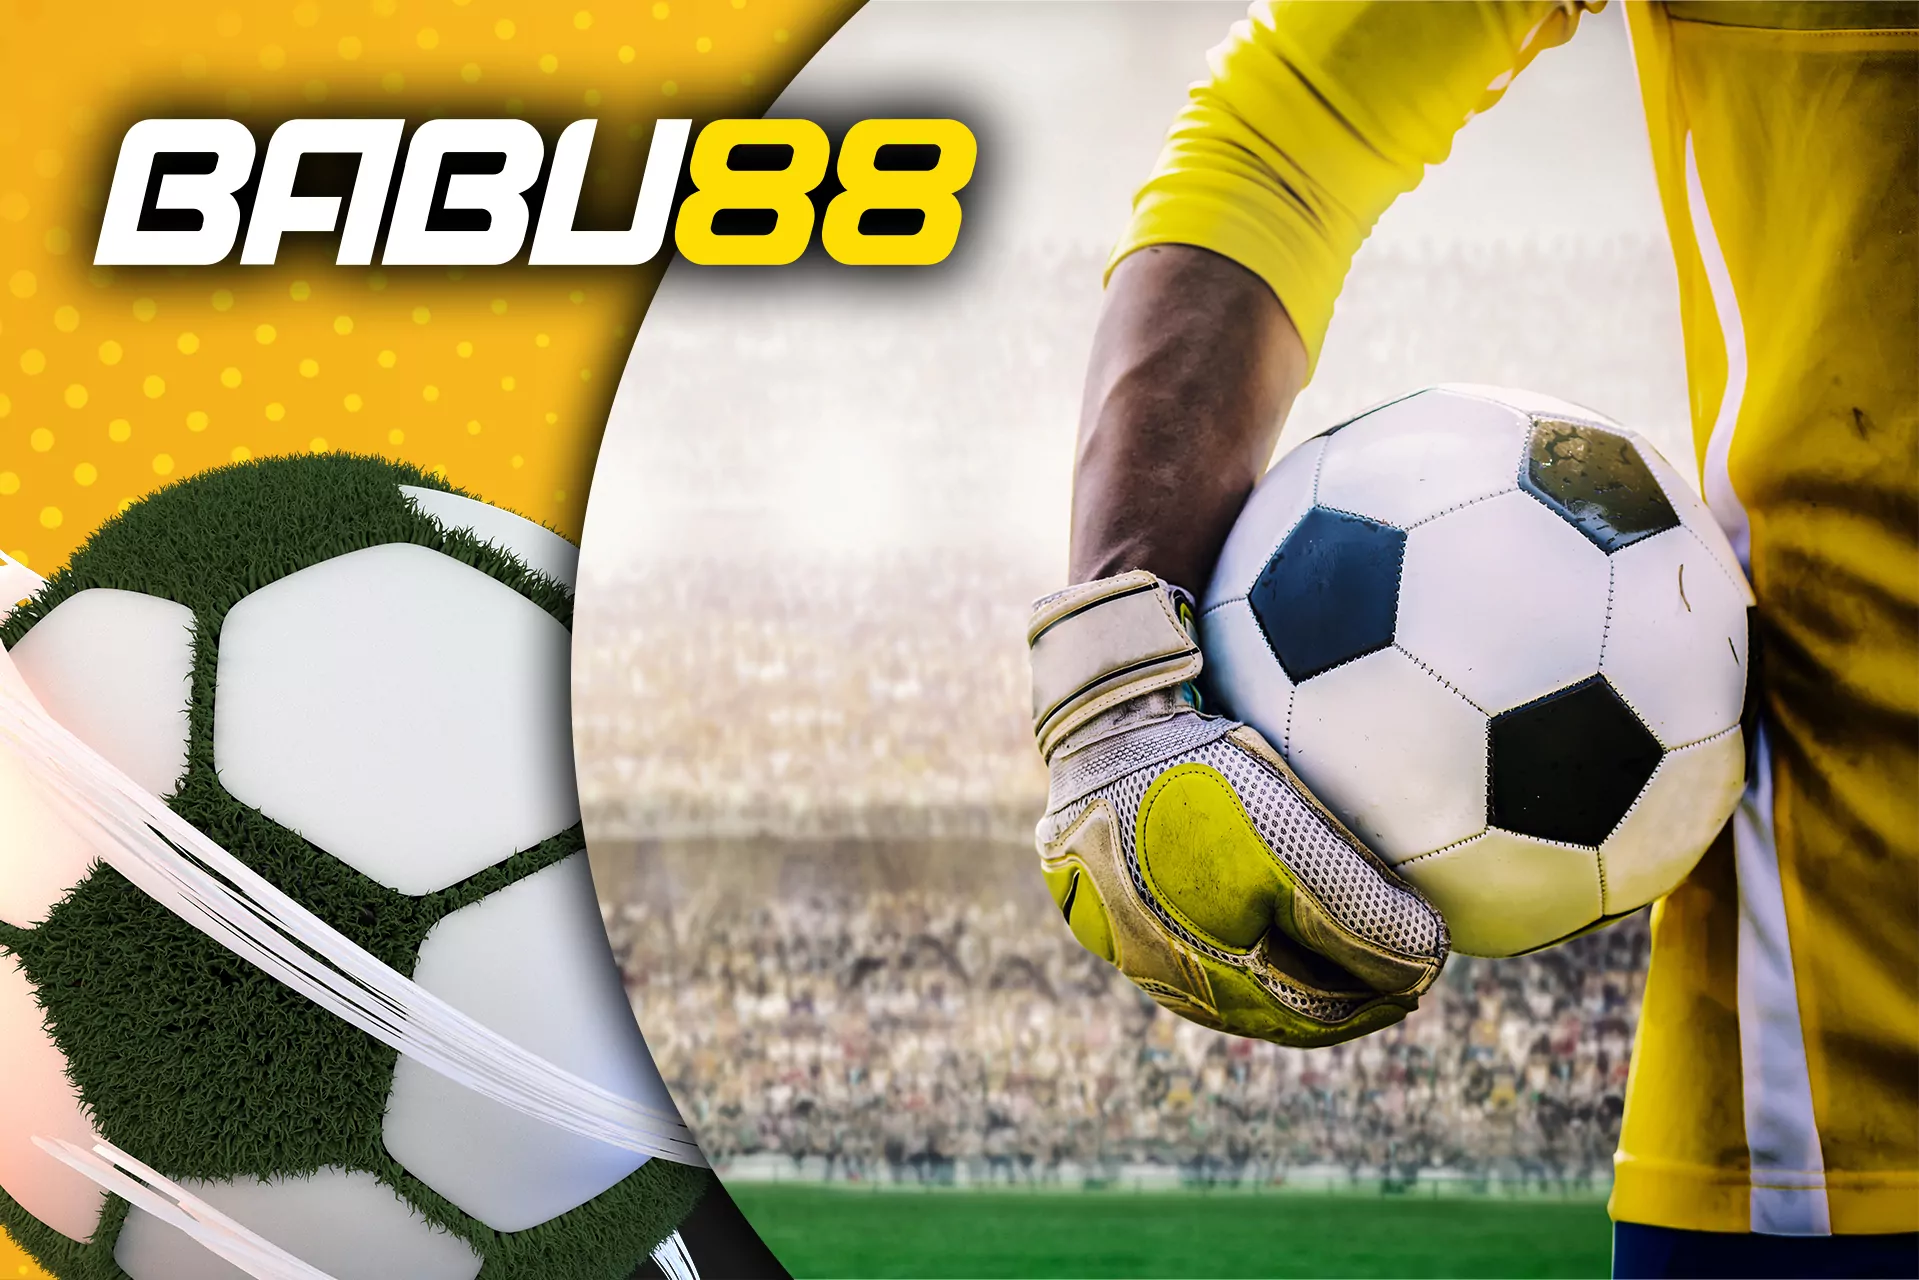 Football is available for betting at Babu88.